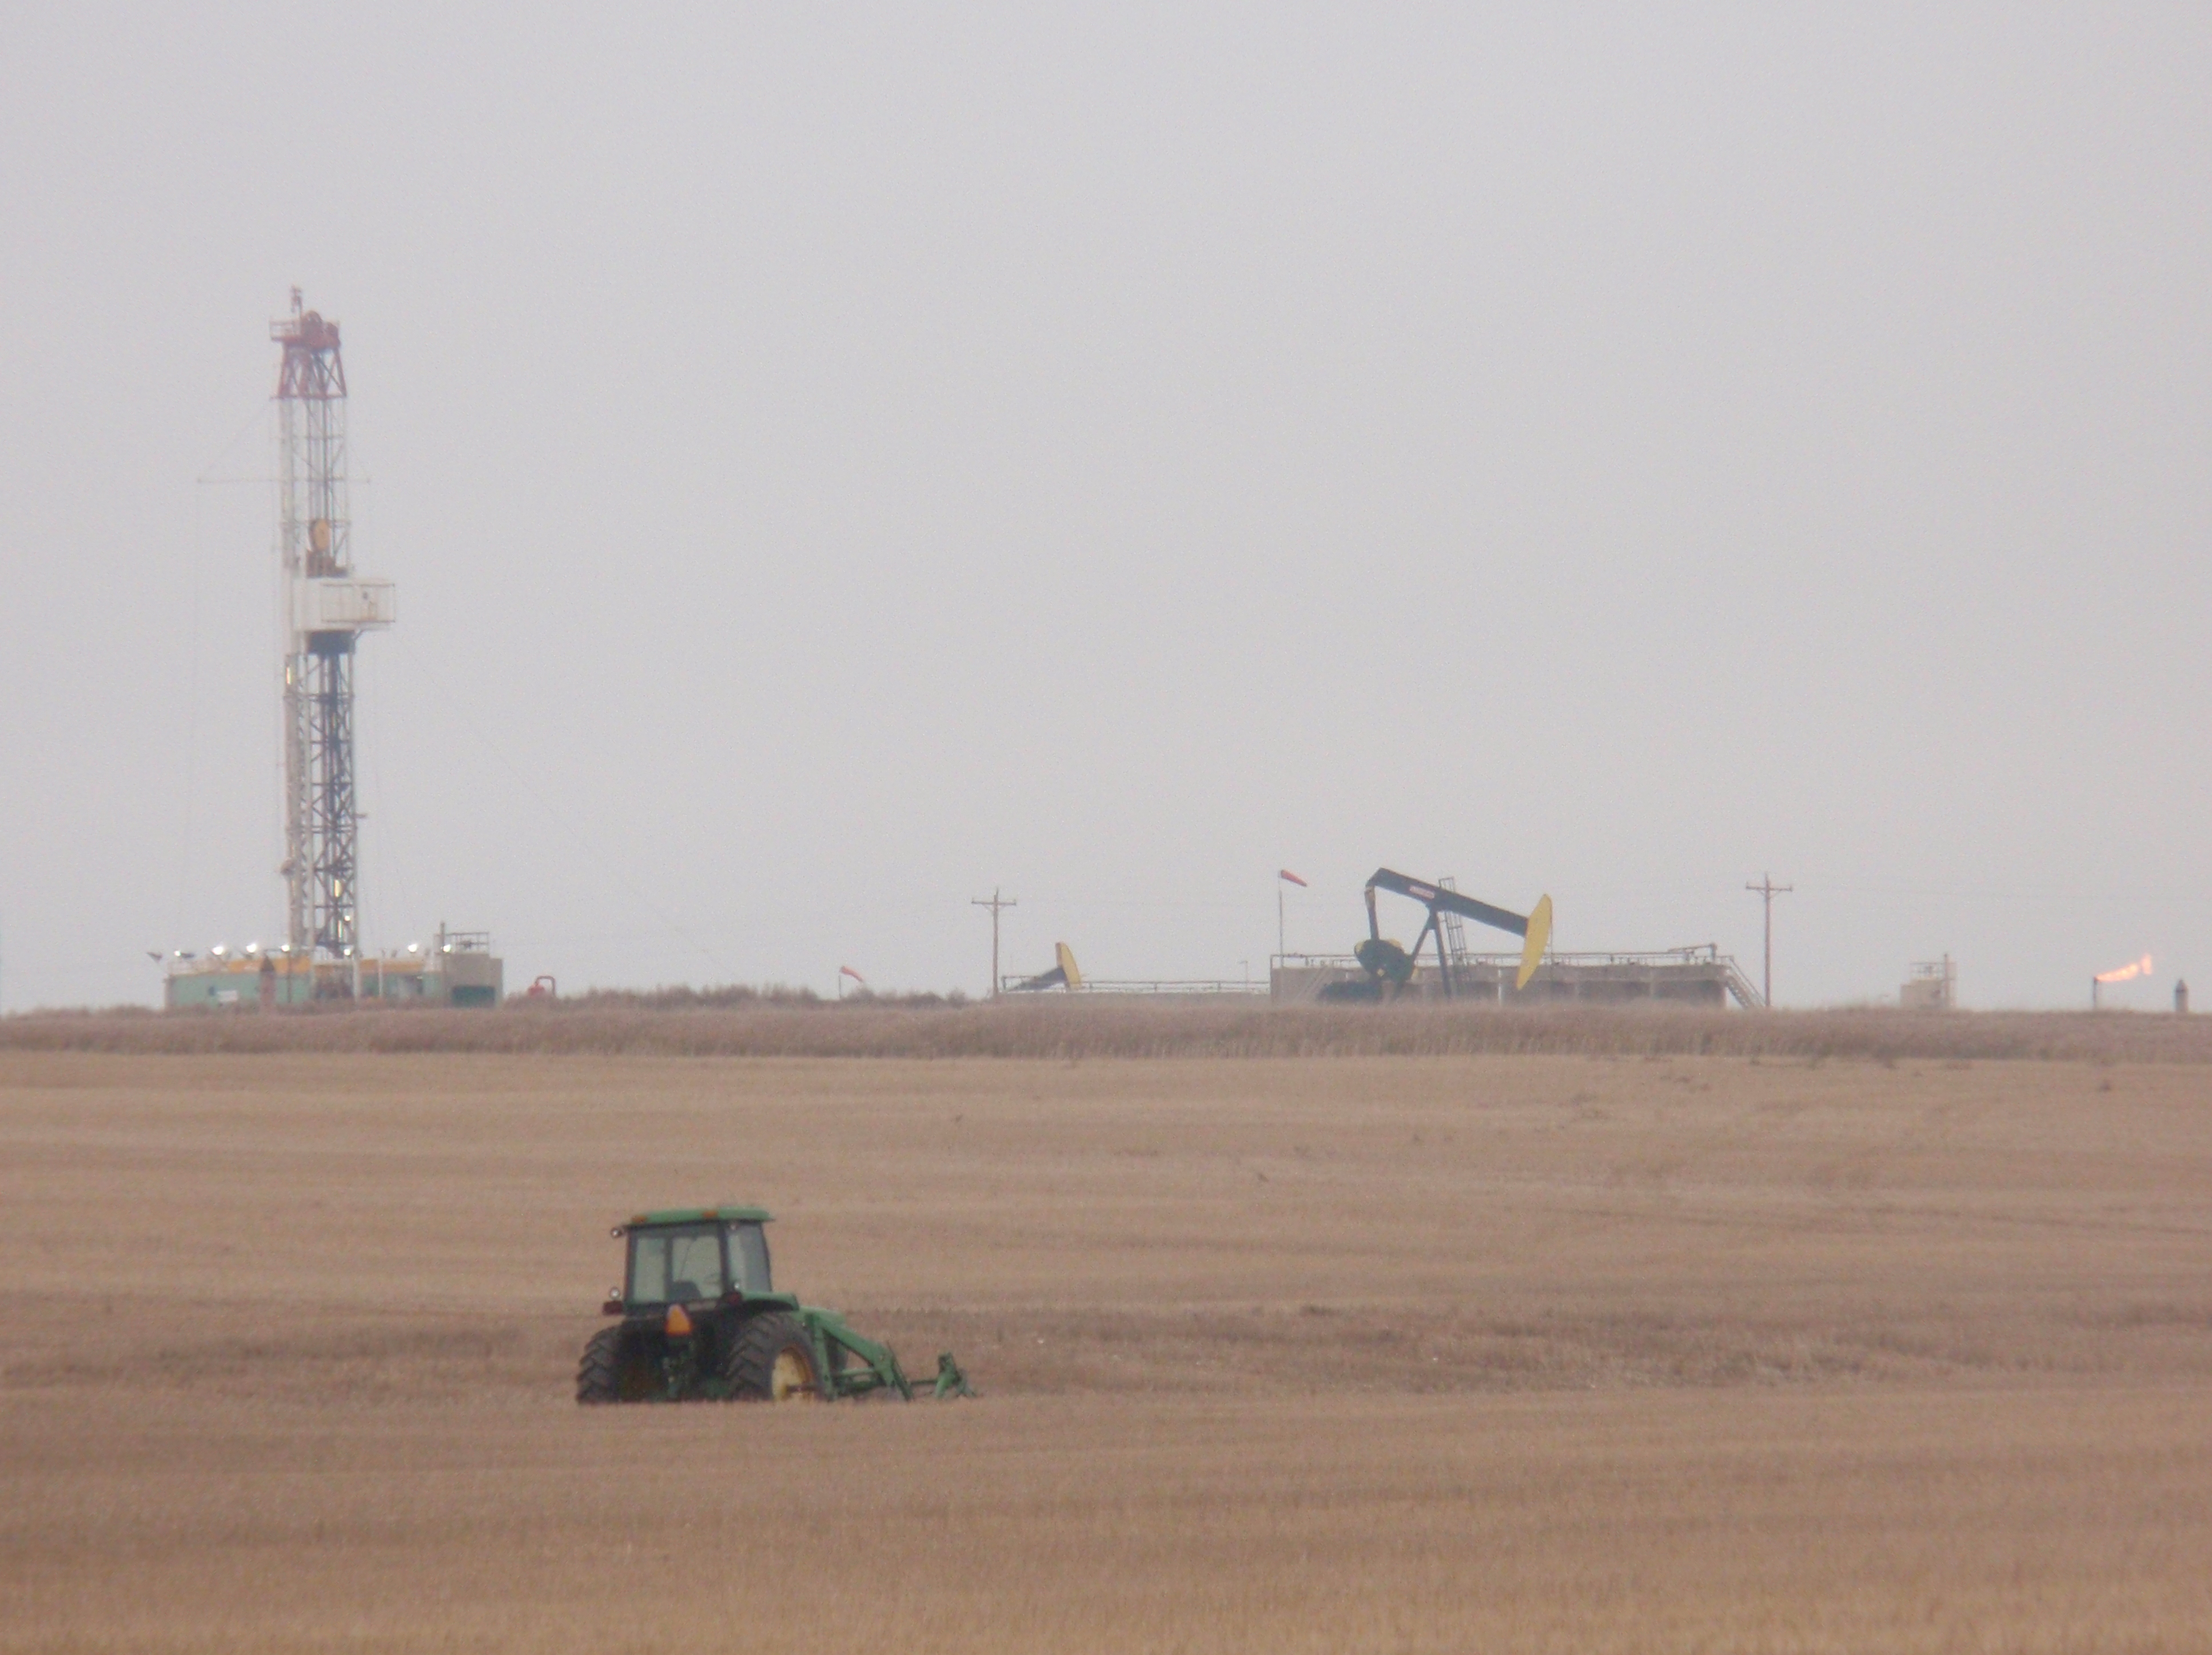 An increasingly rare sight in North Dakota. Not only the active rig, but the flaring as well. Photo by James Ulvog.